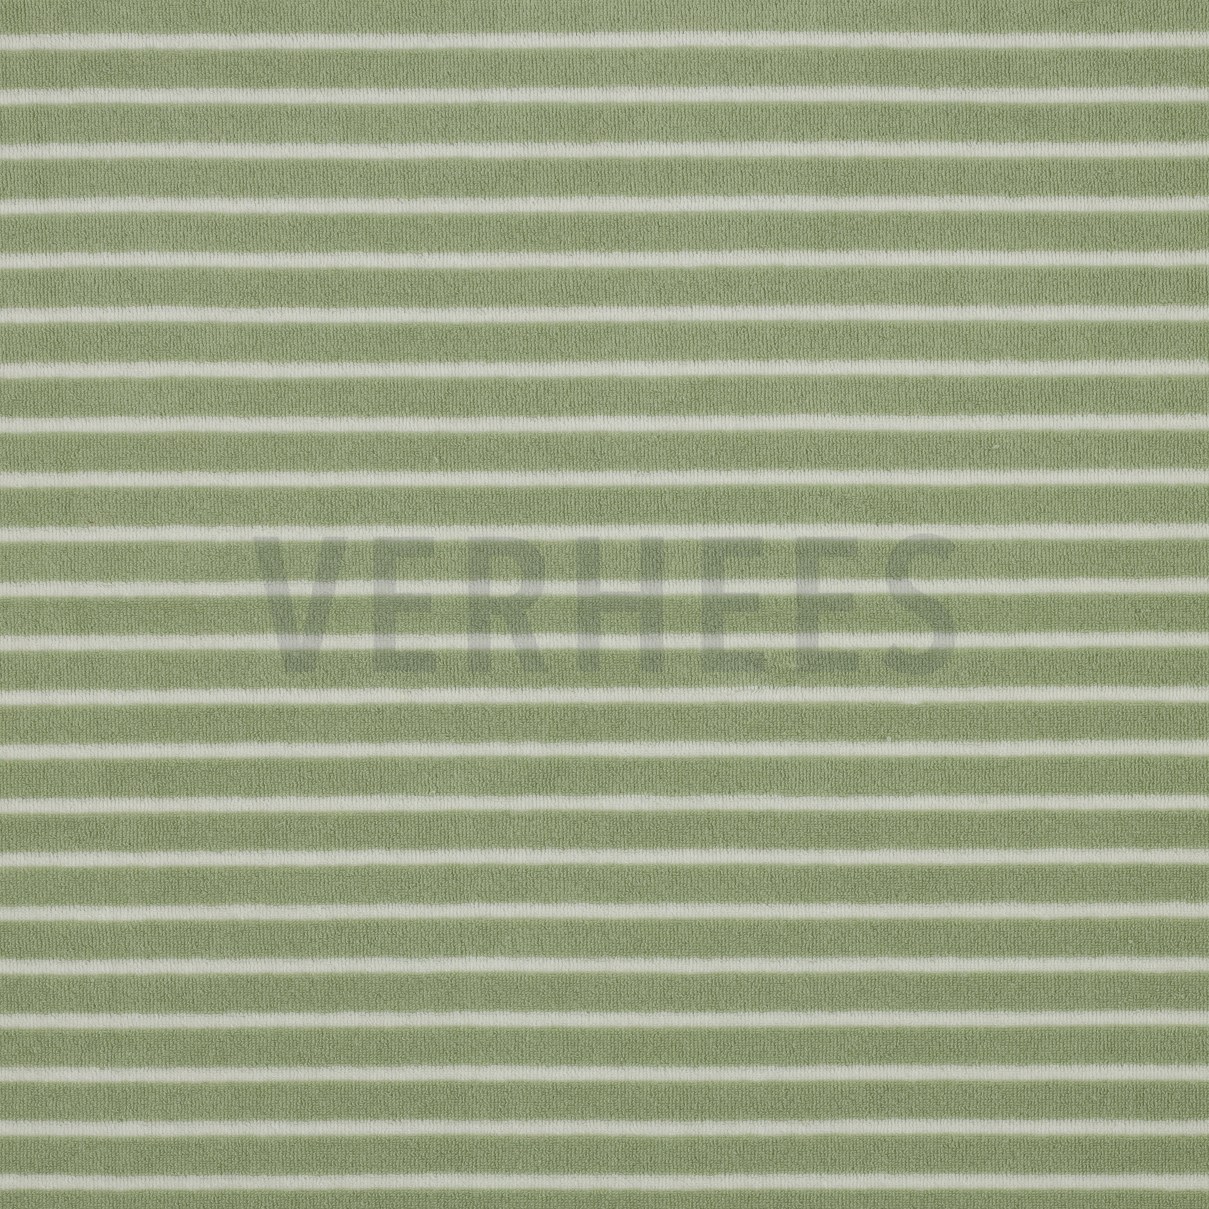 TOWELING YARN DYED STRIPES MINT / OFF WHITE (high resolution)